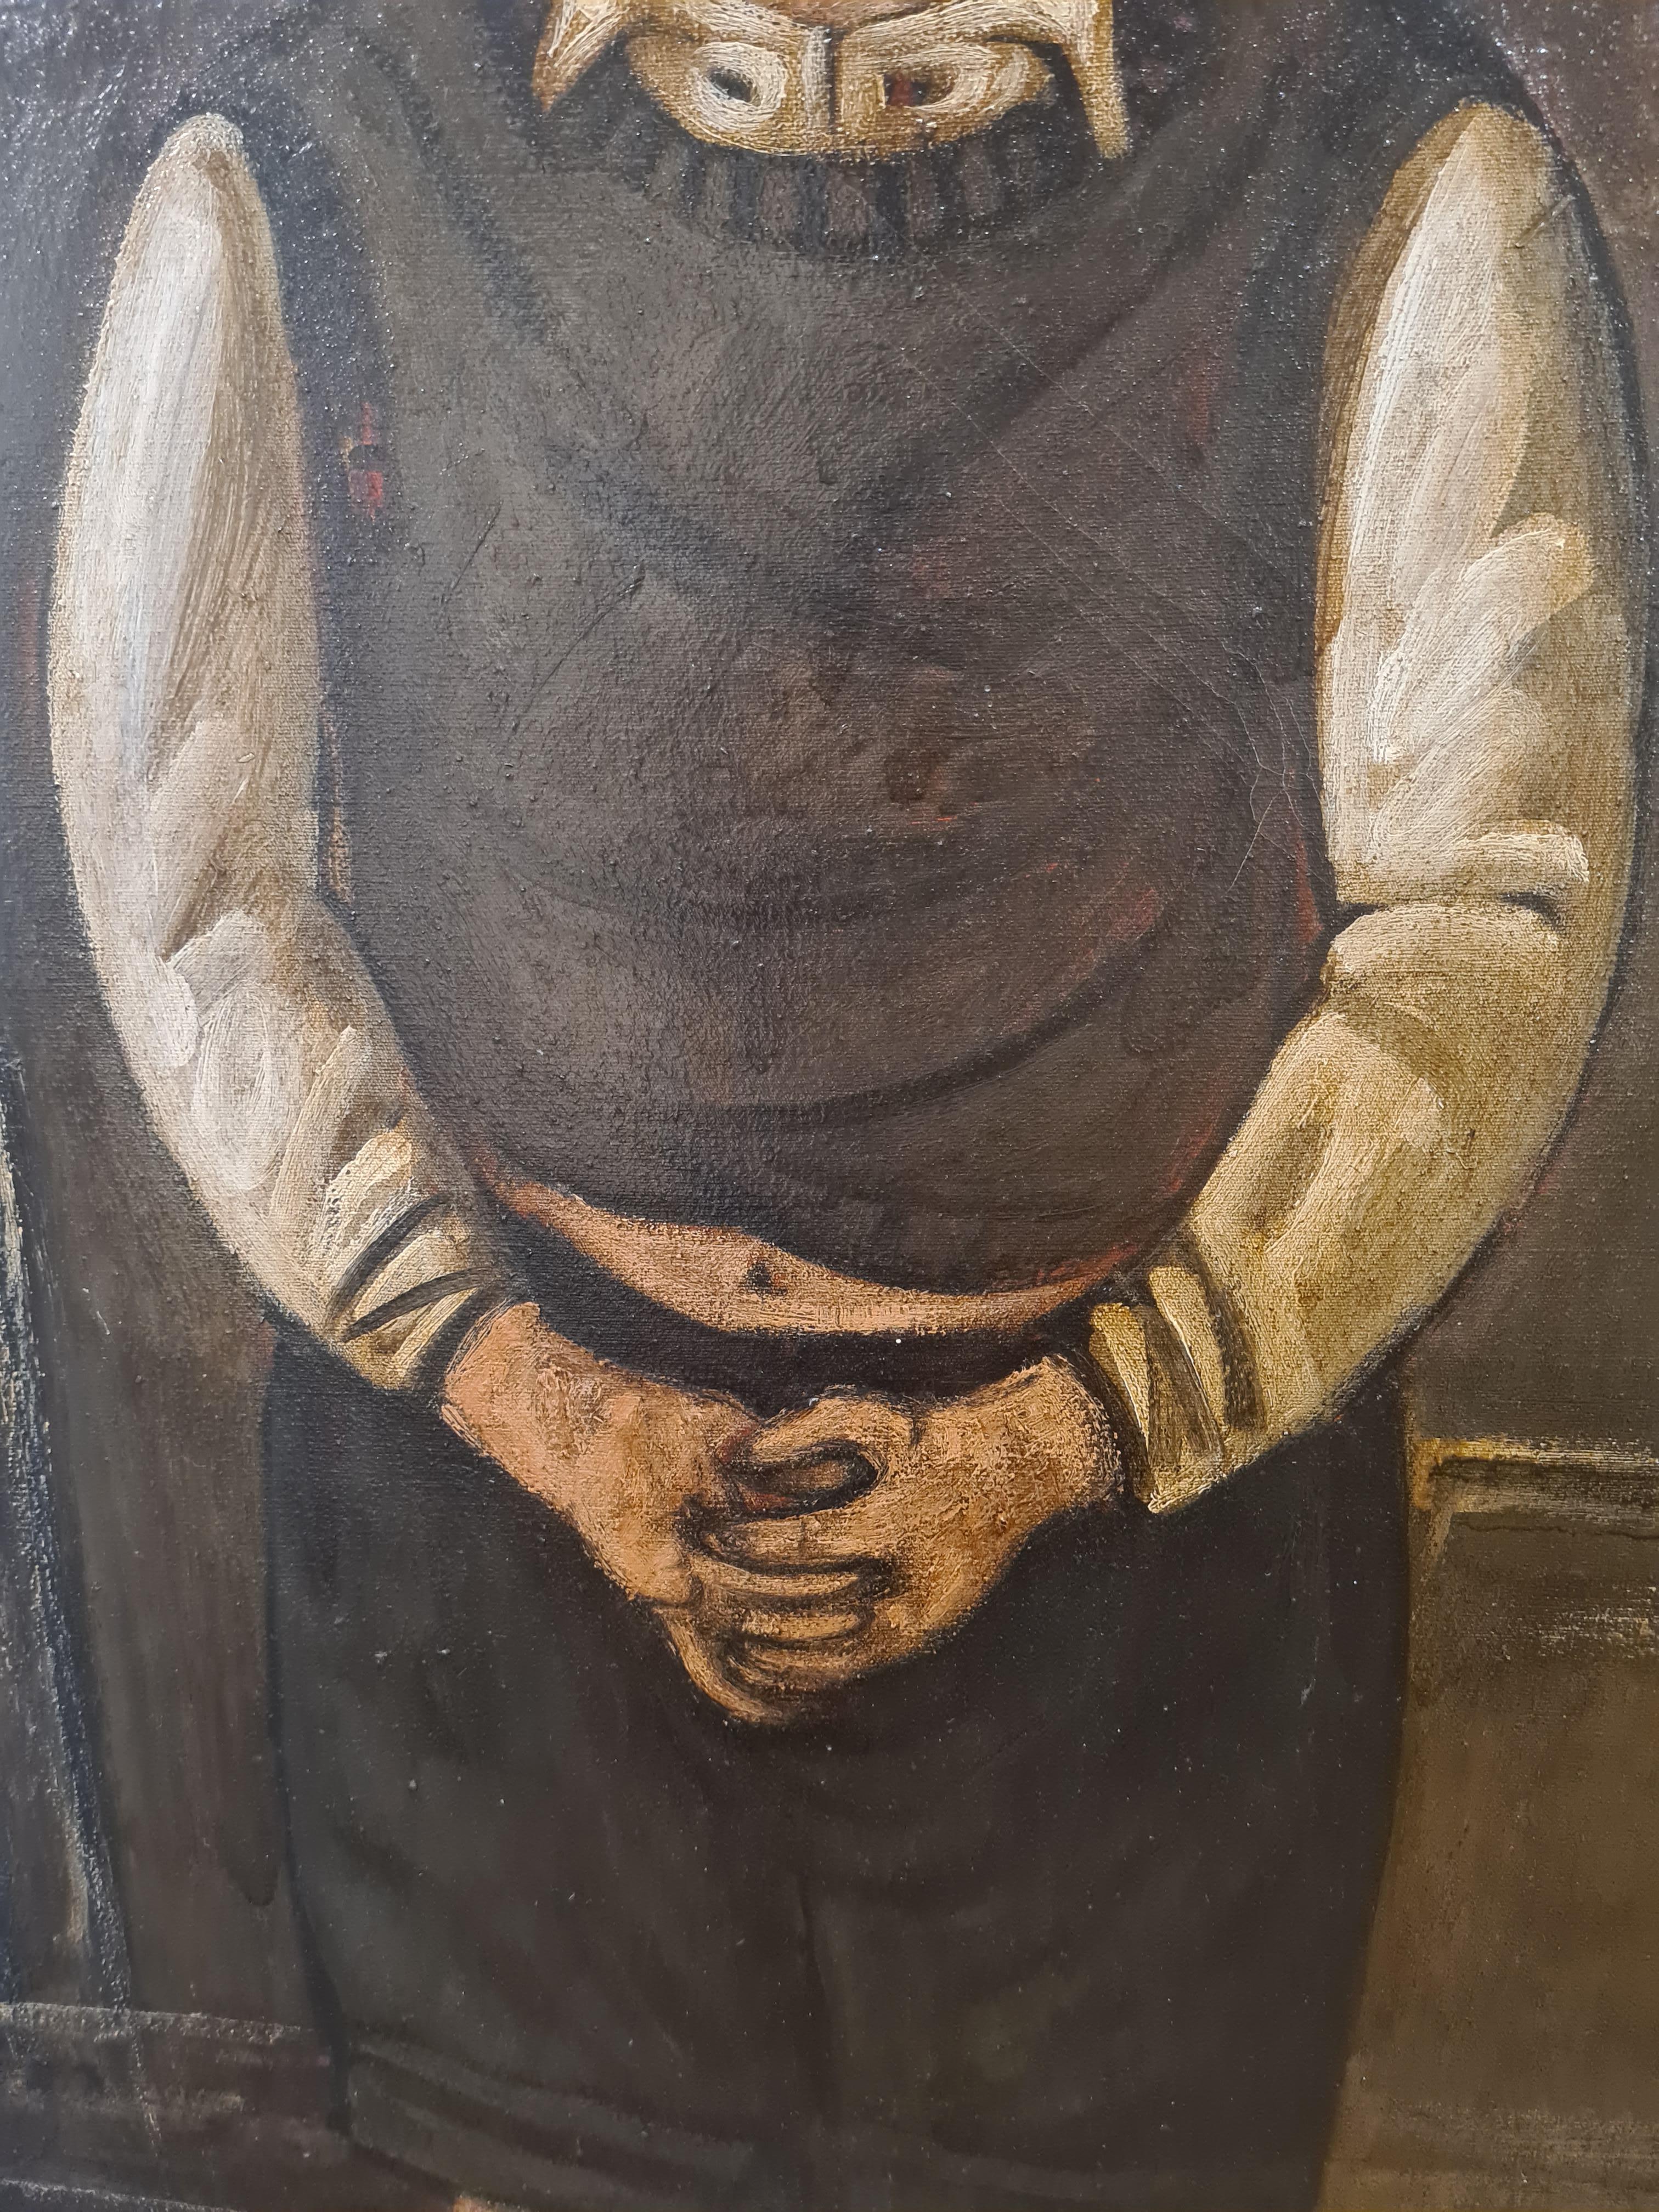 A large Glasgow School oil on canvas portrait by Scottish artist Stuart Mackenzie. The painting is presented in a plain baton wood frame.

Though not signed the painting was acquired directly from the artist and thence by descent.

'Him' is of a boy